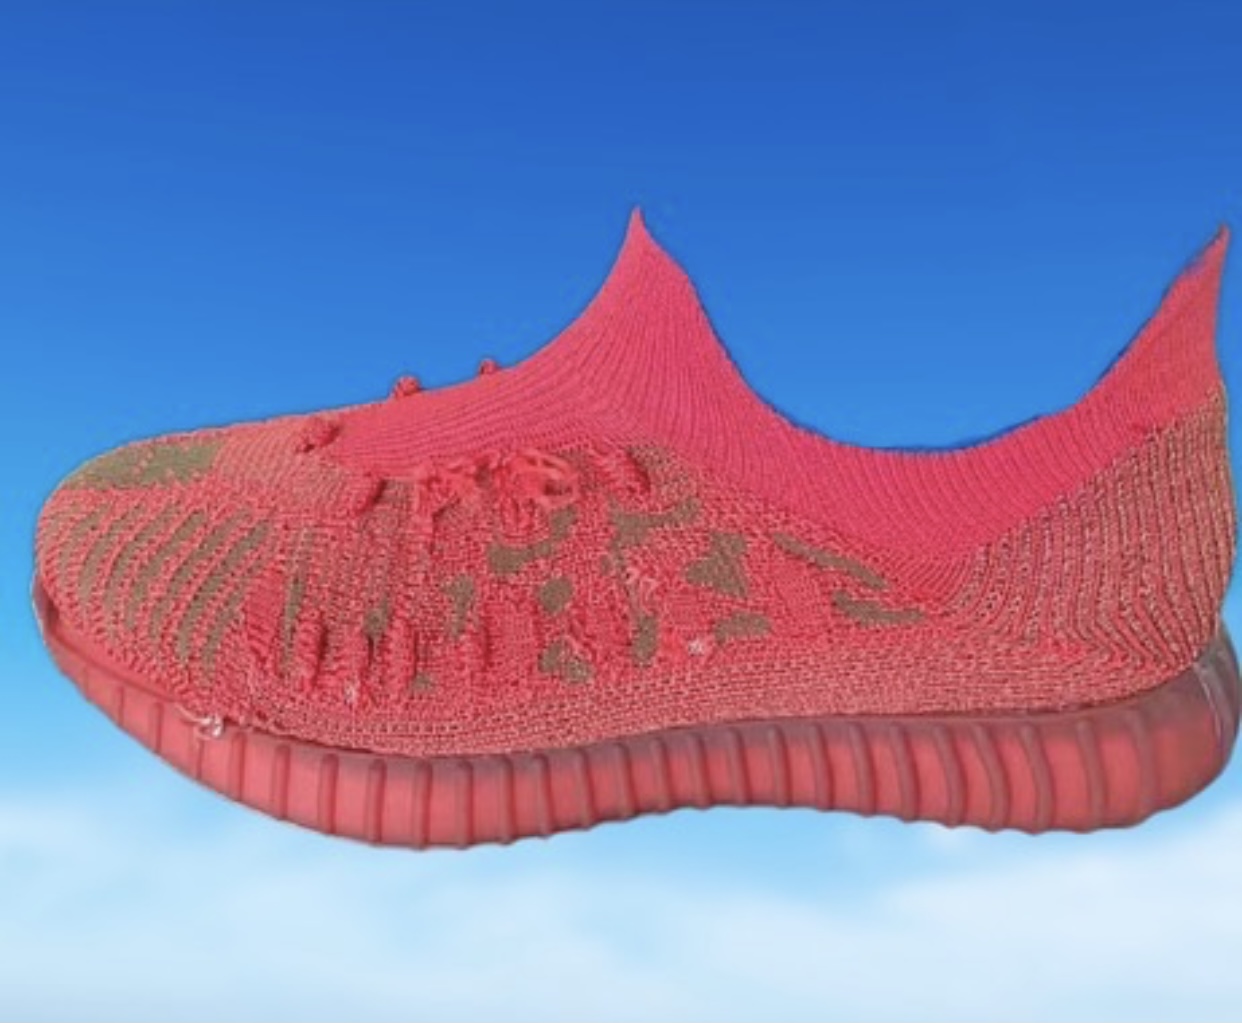 YZY 350 V2 CMPCT "Slate Red"